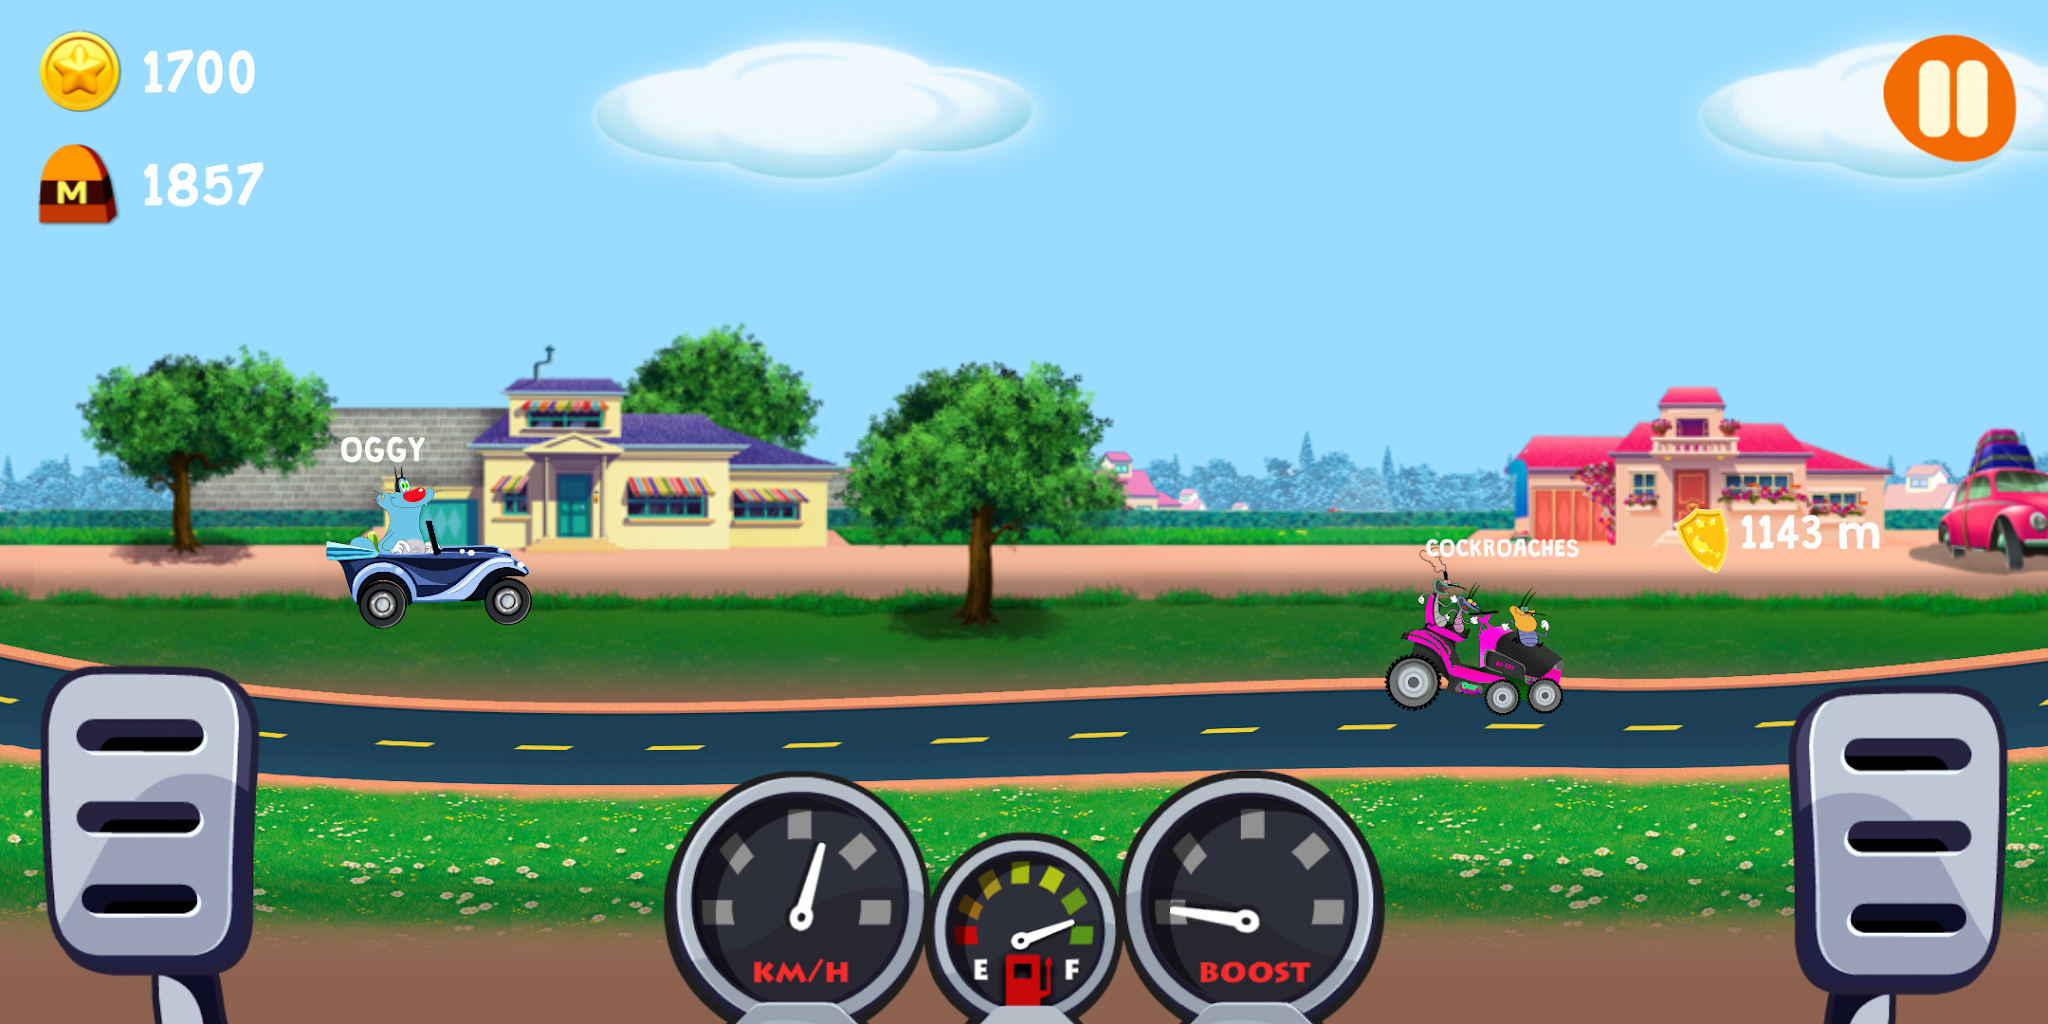 Download Oggy Go - World of Racing (The Official Game)  APK for  android